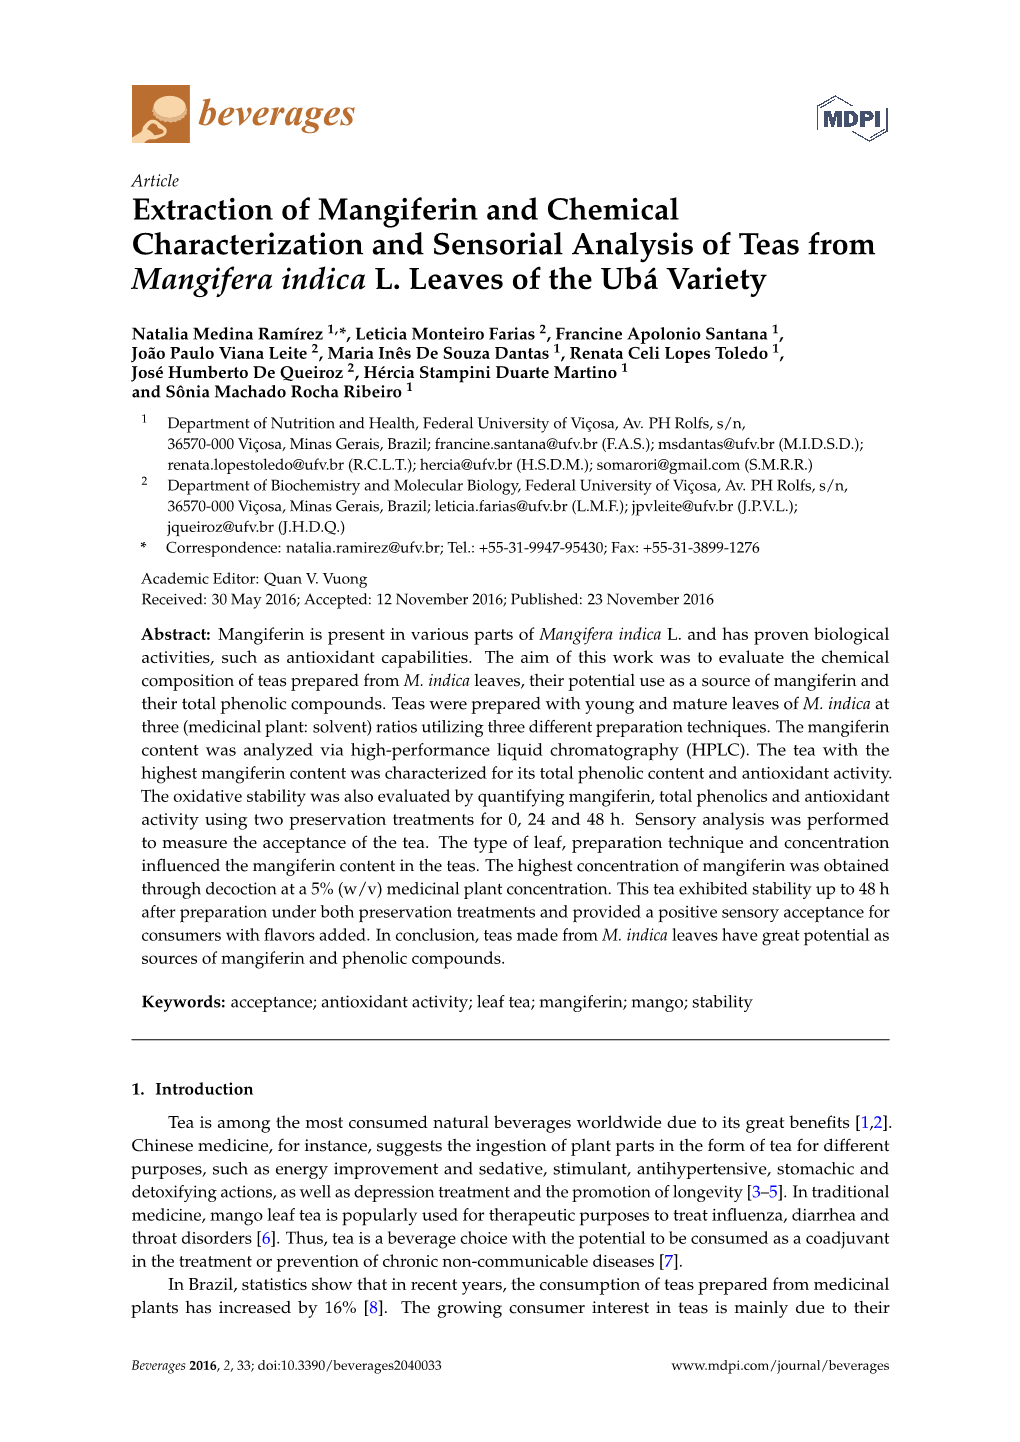 Extraction of Mangiferin and Chemical Characterization and Sensorial Analysis of Teas from Mangifera Indica L